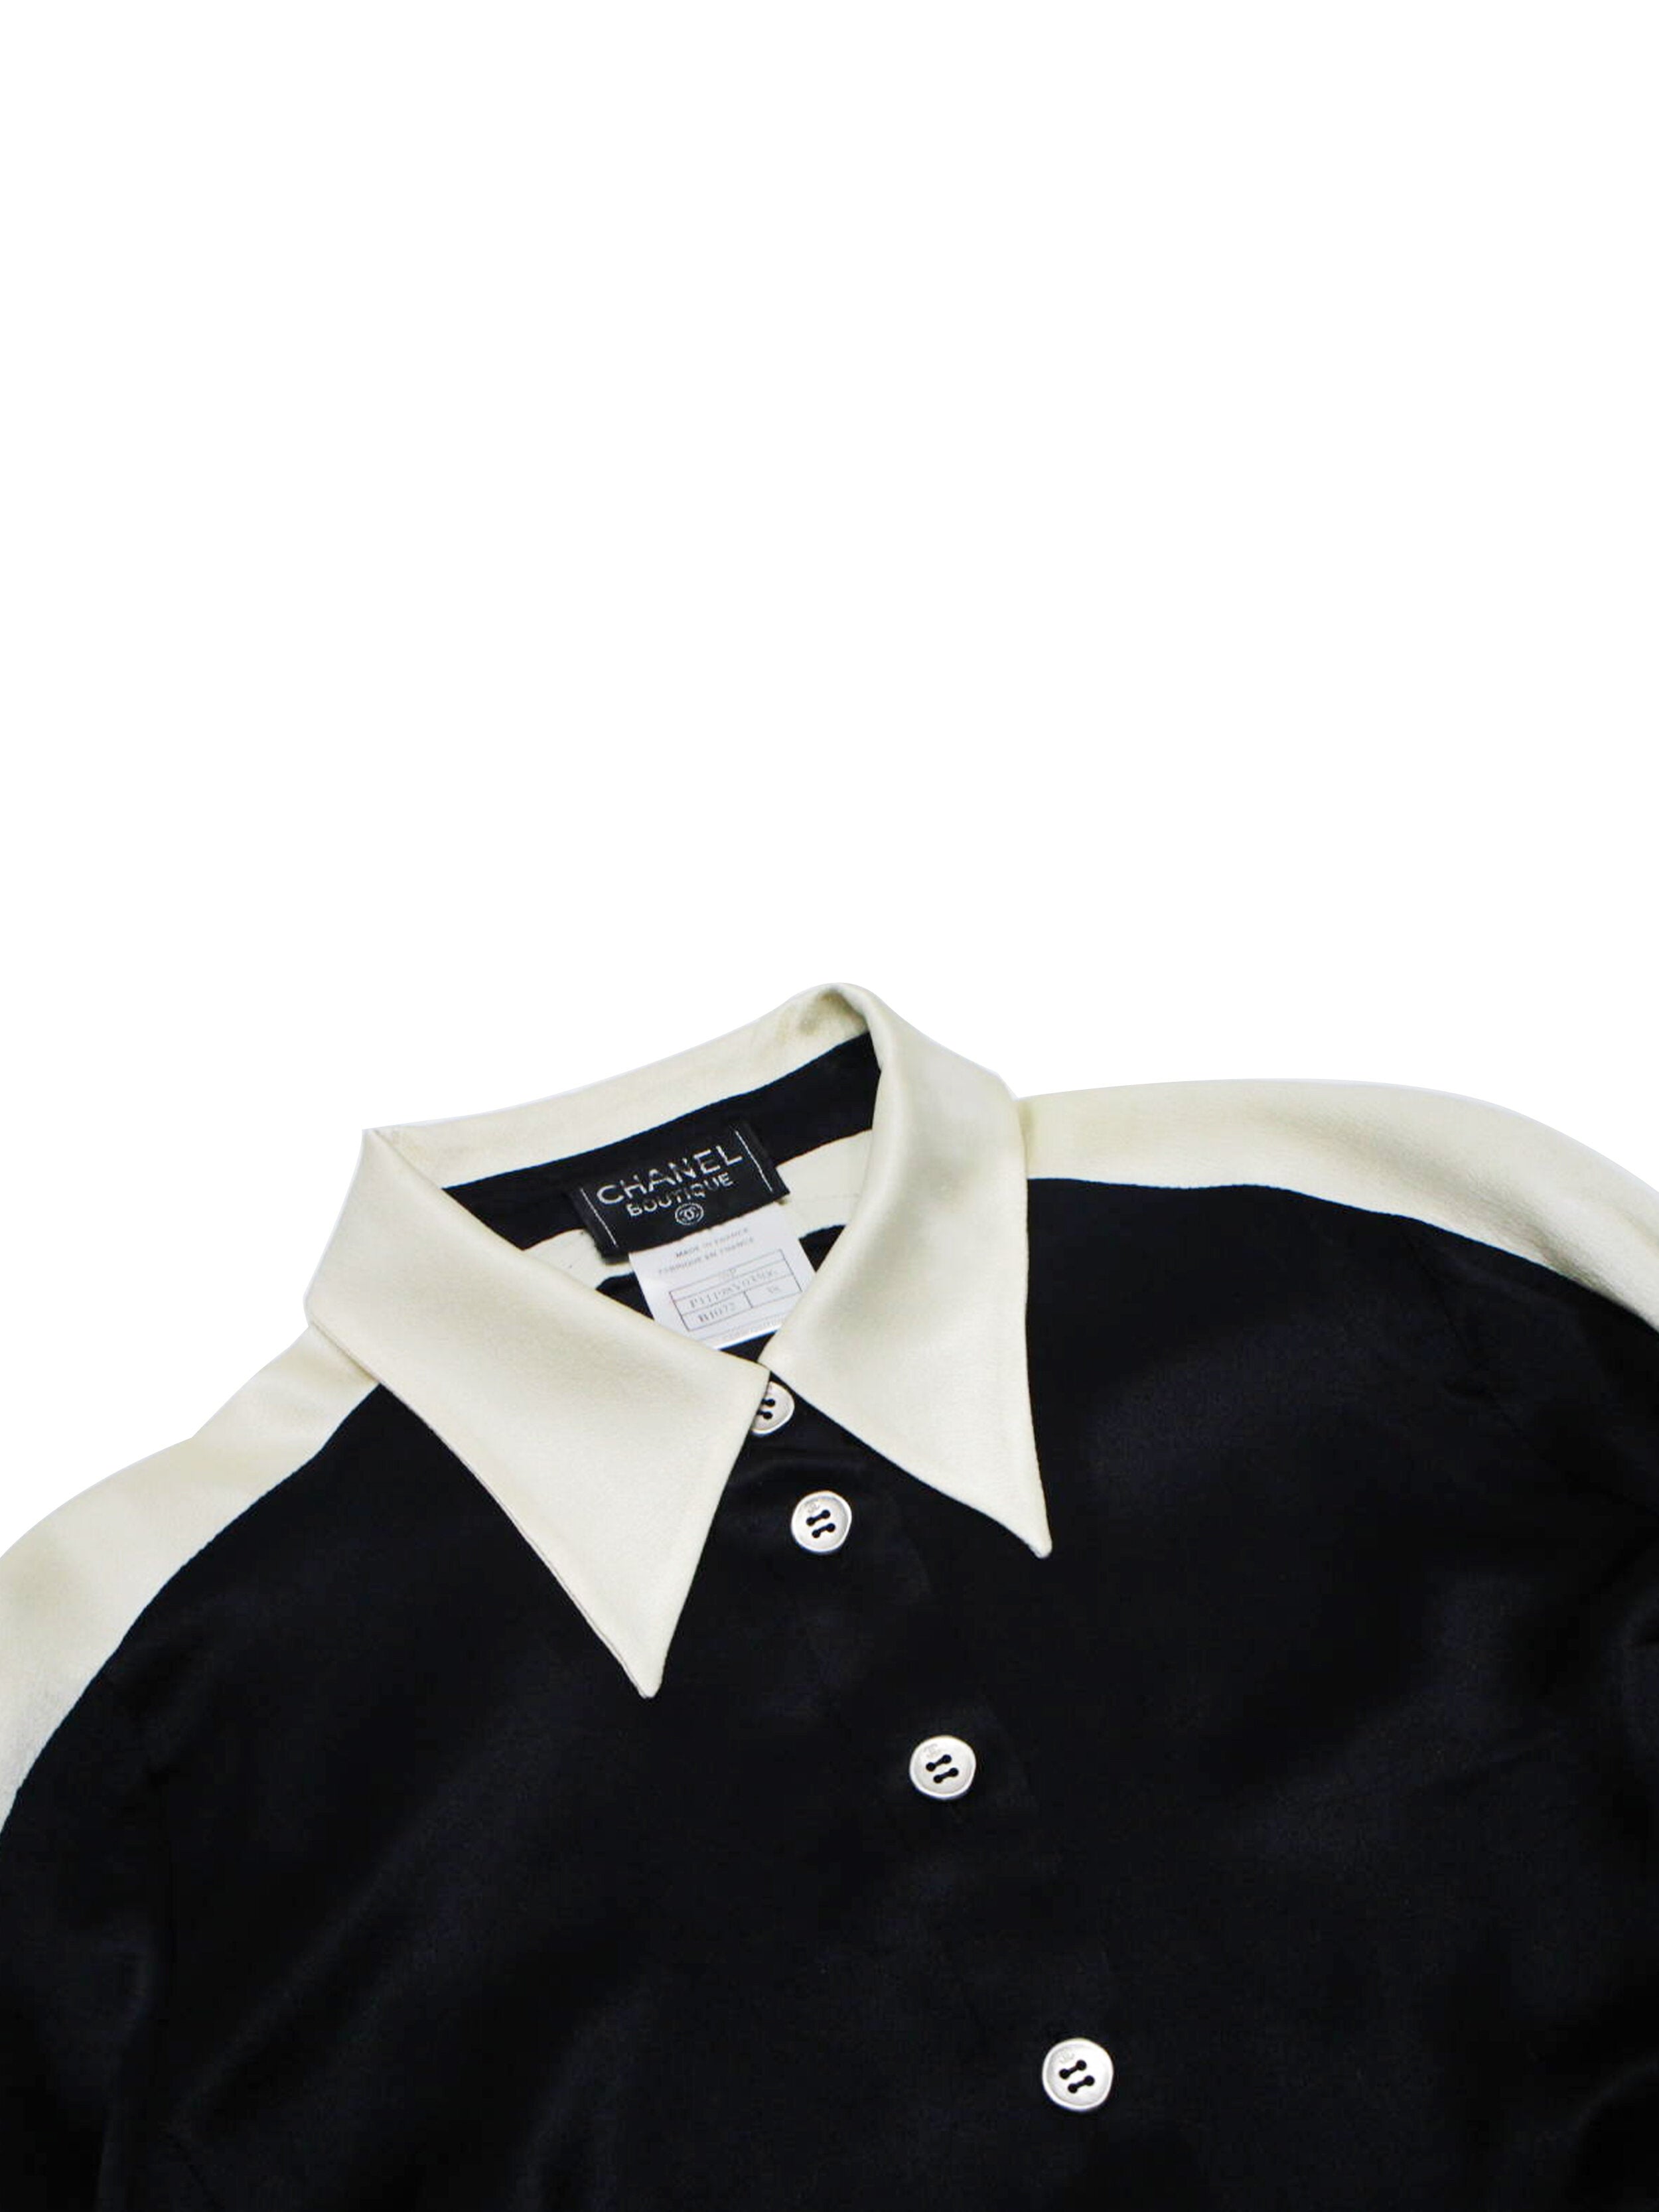 Chanel Silk Black and White Shirt · INTO